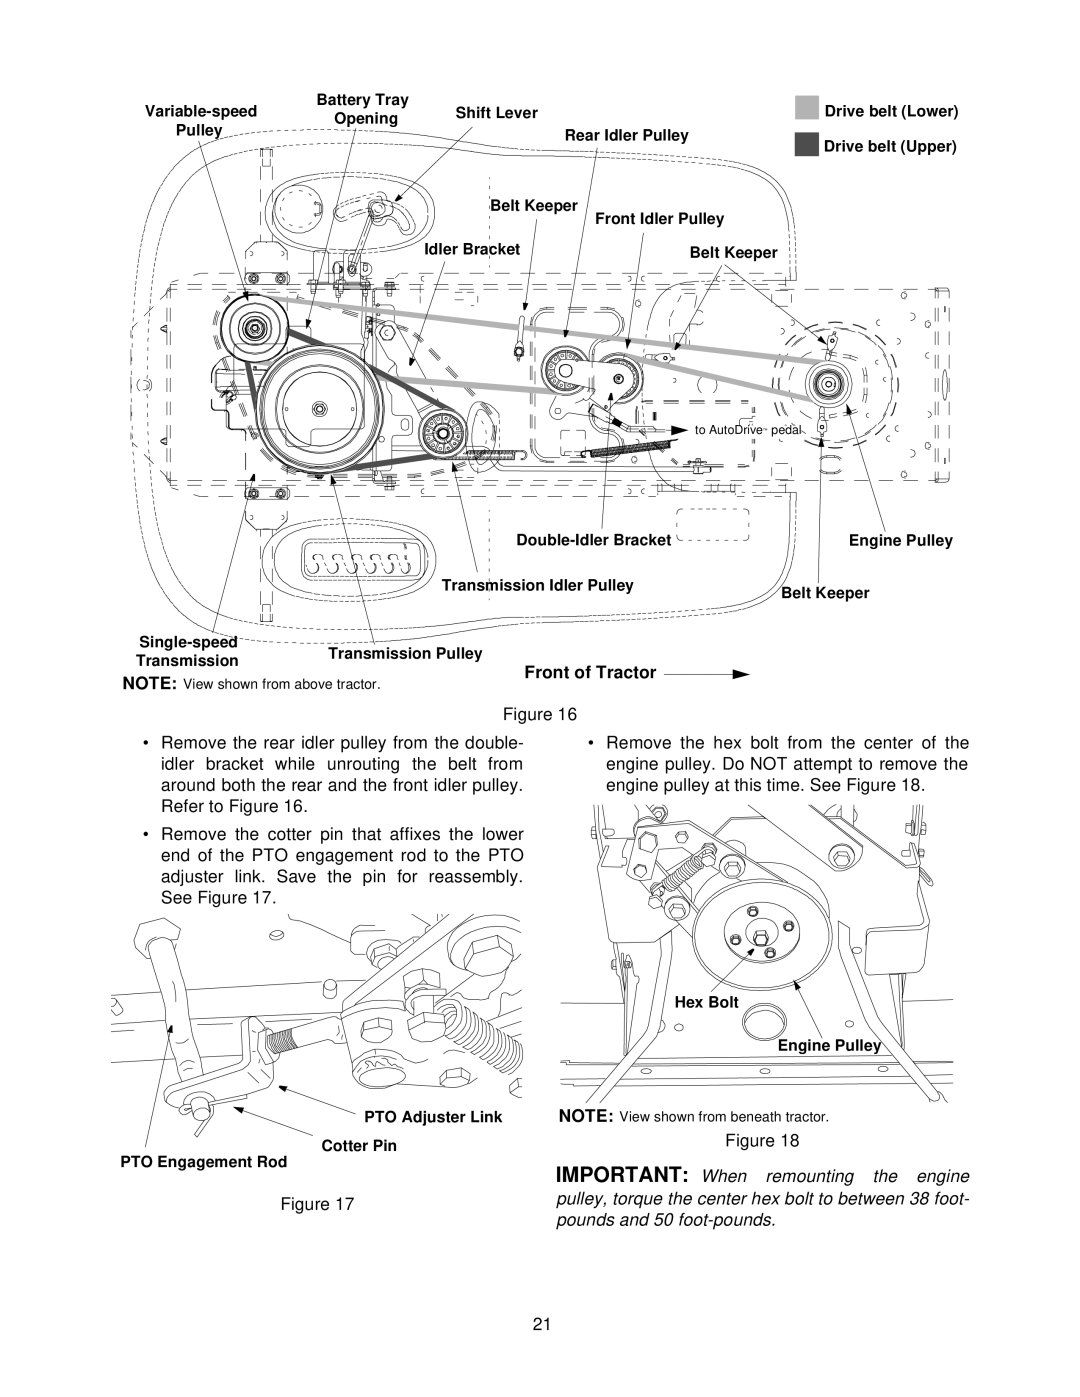 Troy-Bilt 604 manual Front of Tractor 